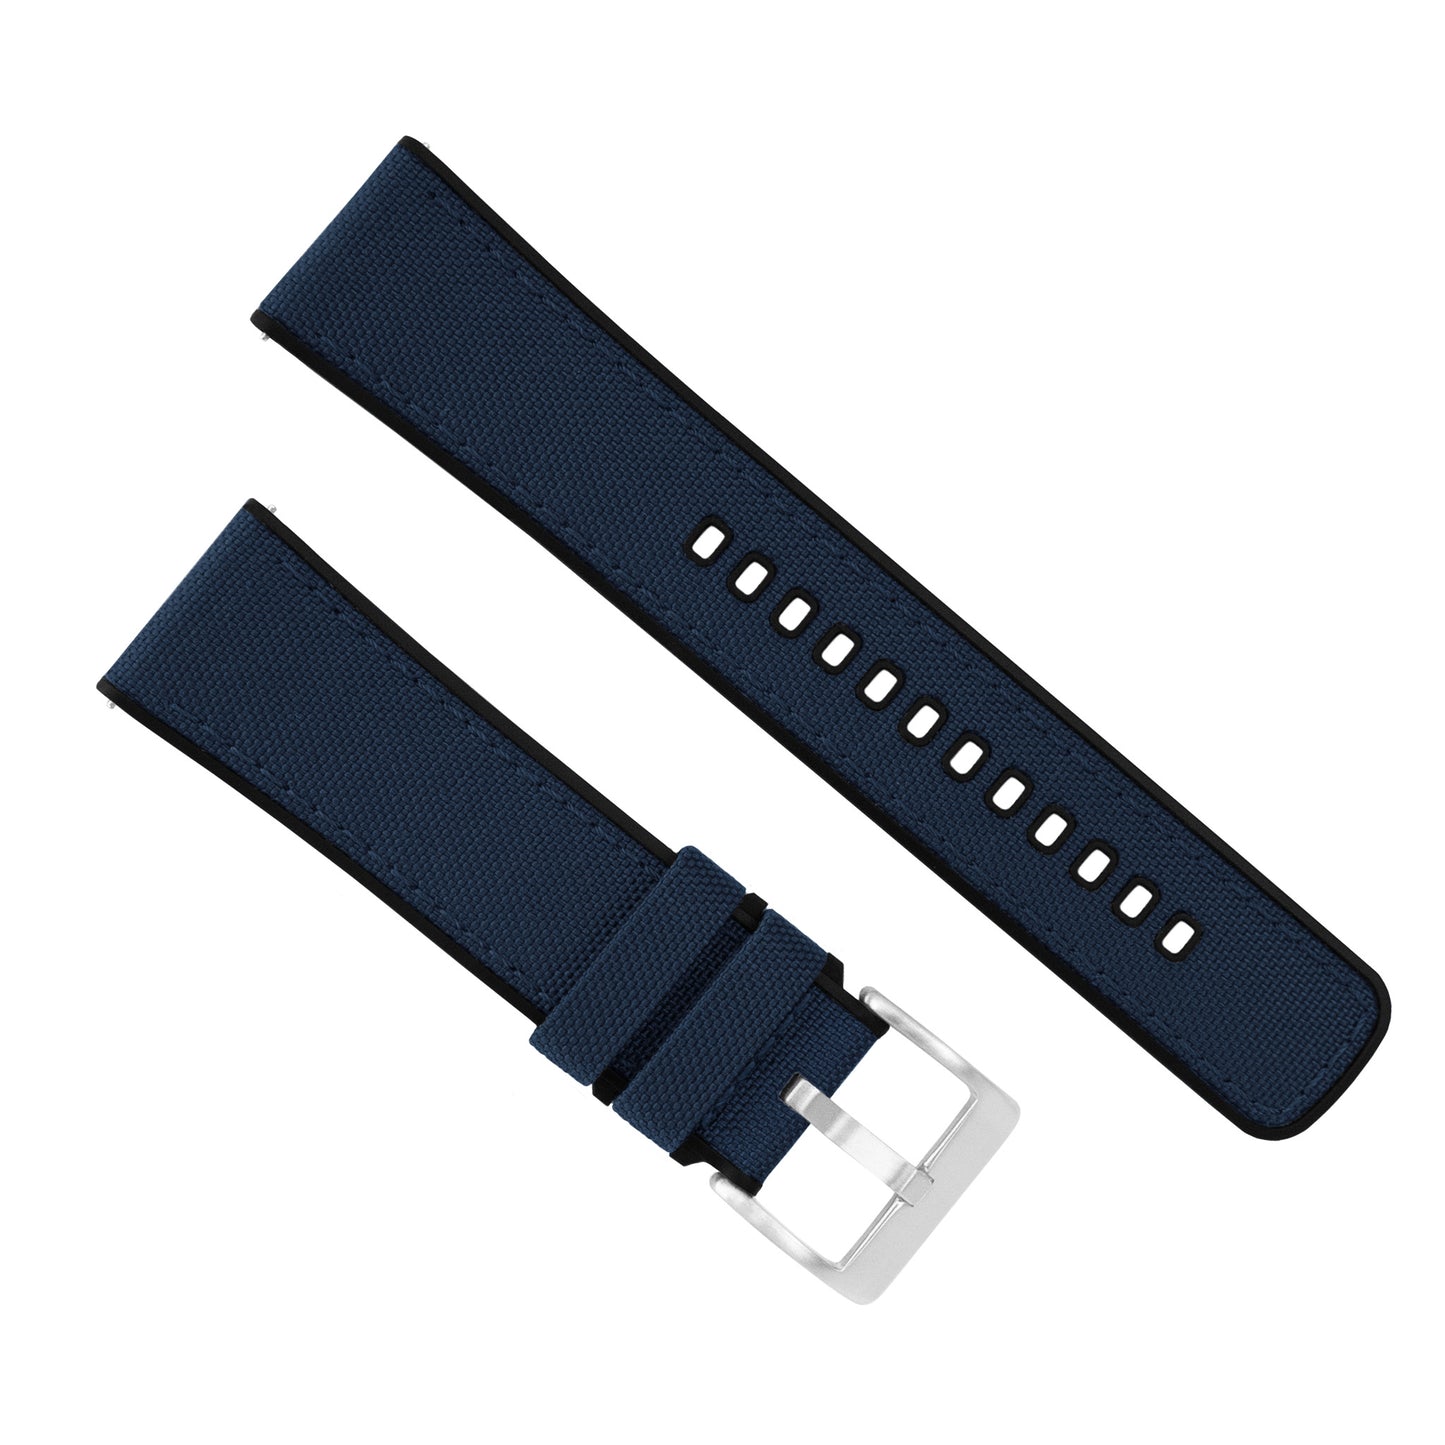 Timex Weekender Expedition Watches Cordrua Fabric Silicone Hybrid Navy Blue Watch Band